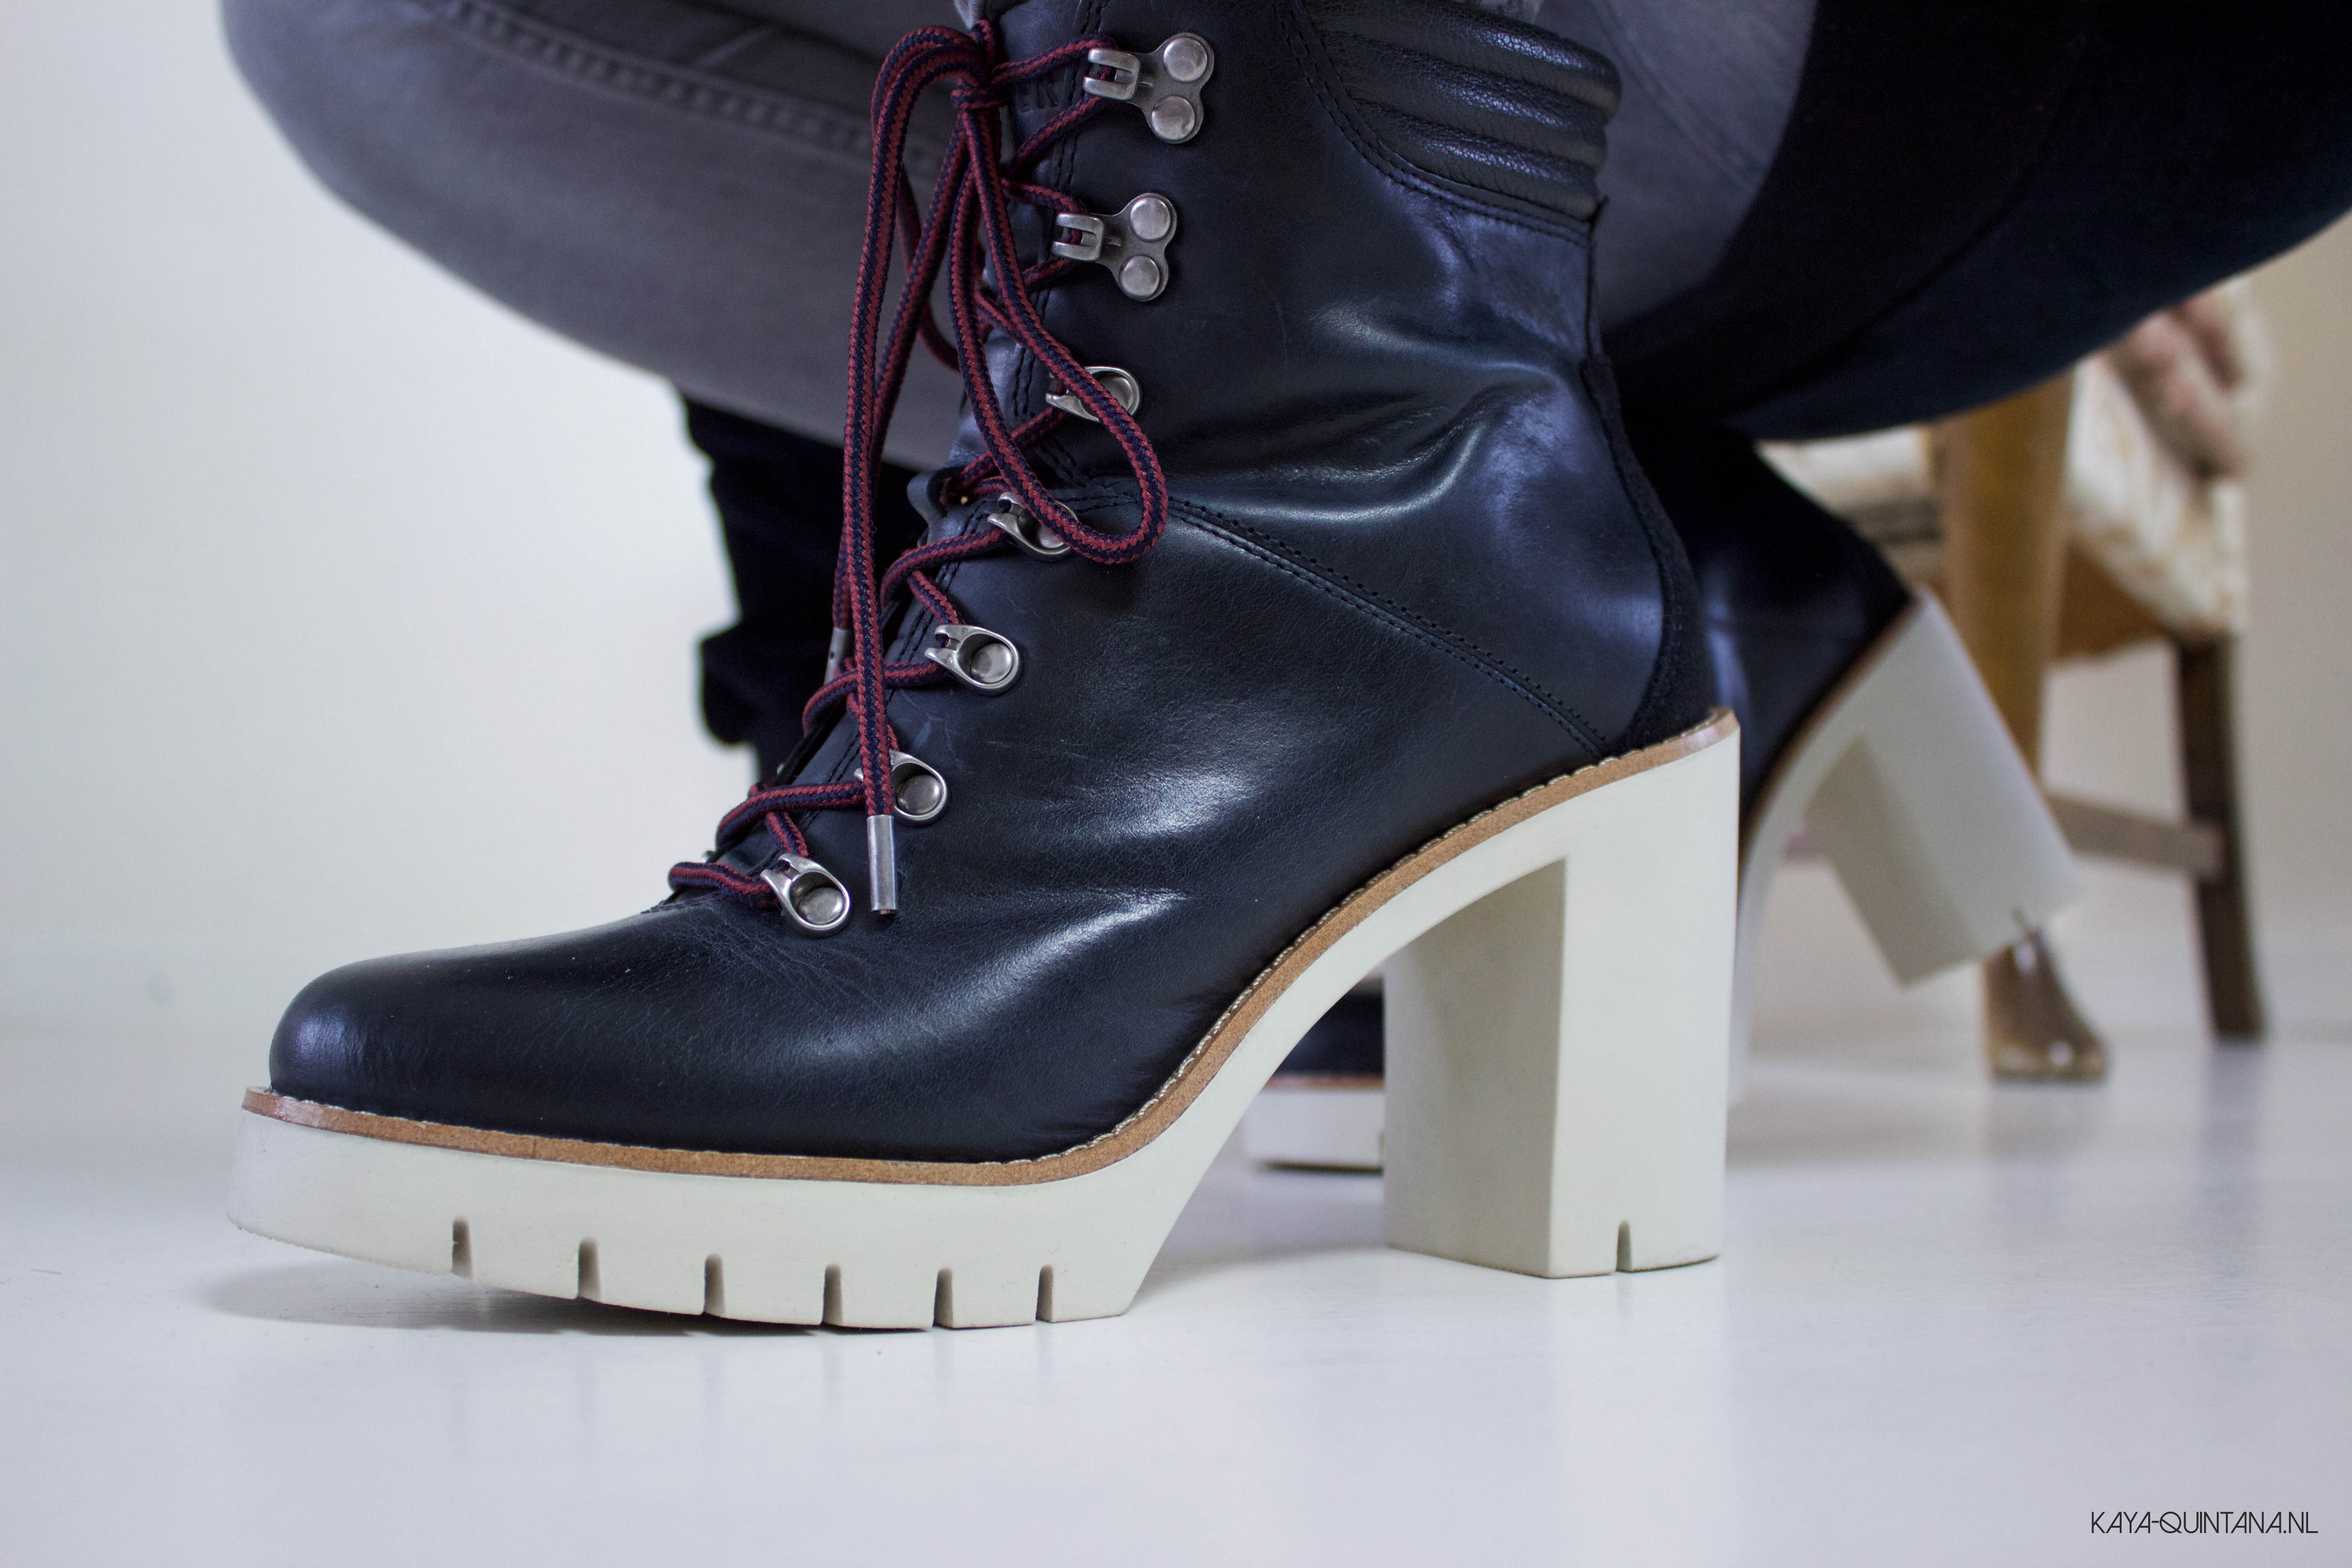 tommy hilfiger ankle boots